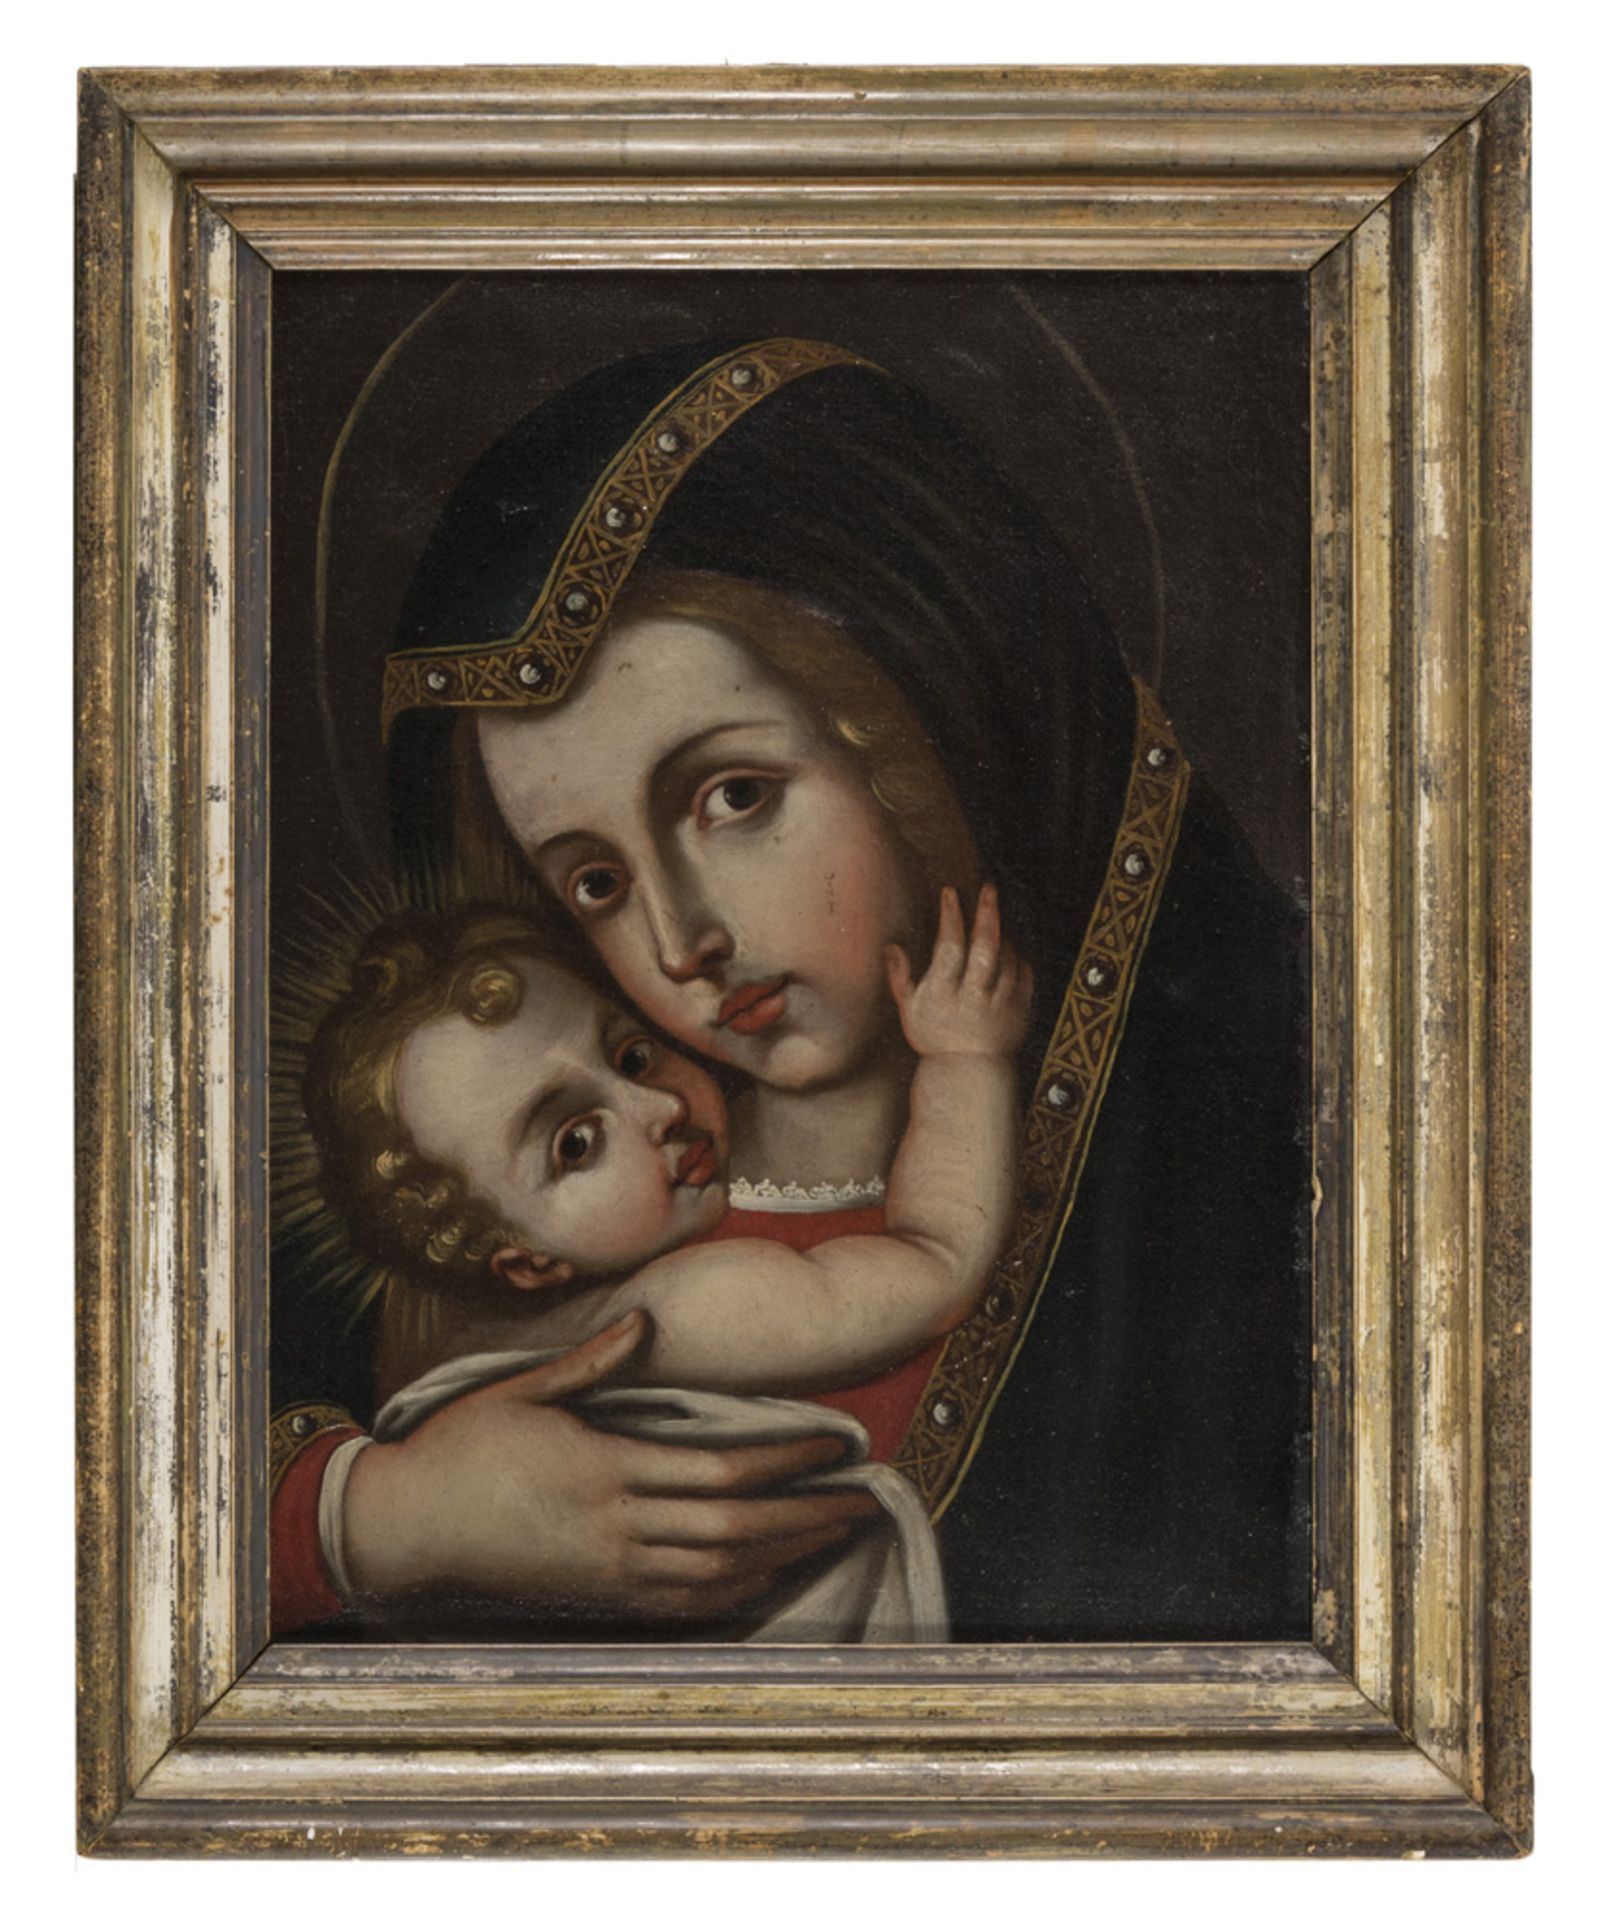 ITALIAN PAINTER, 18TH CENTURY VIRGIN AND CHILD Oil on canvas, cm. 47 x 36 Lacquered frame PITTORE